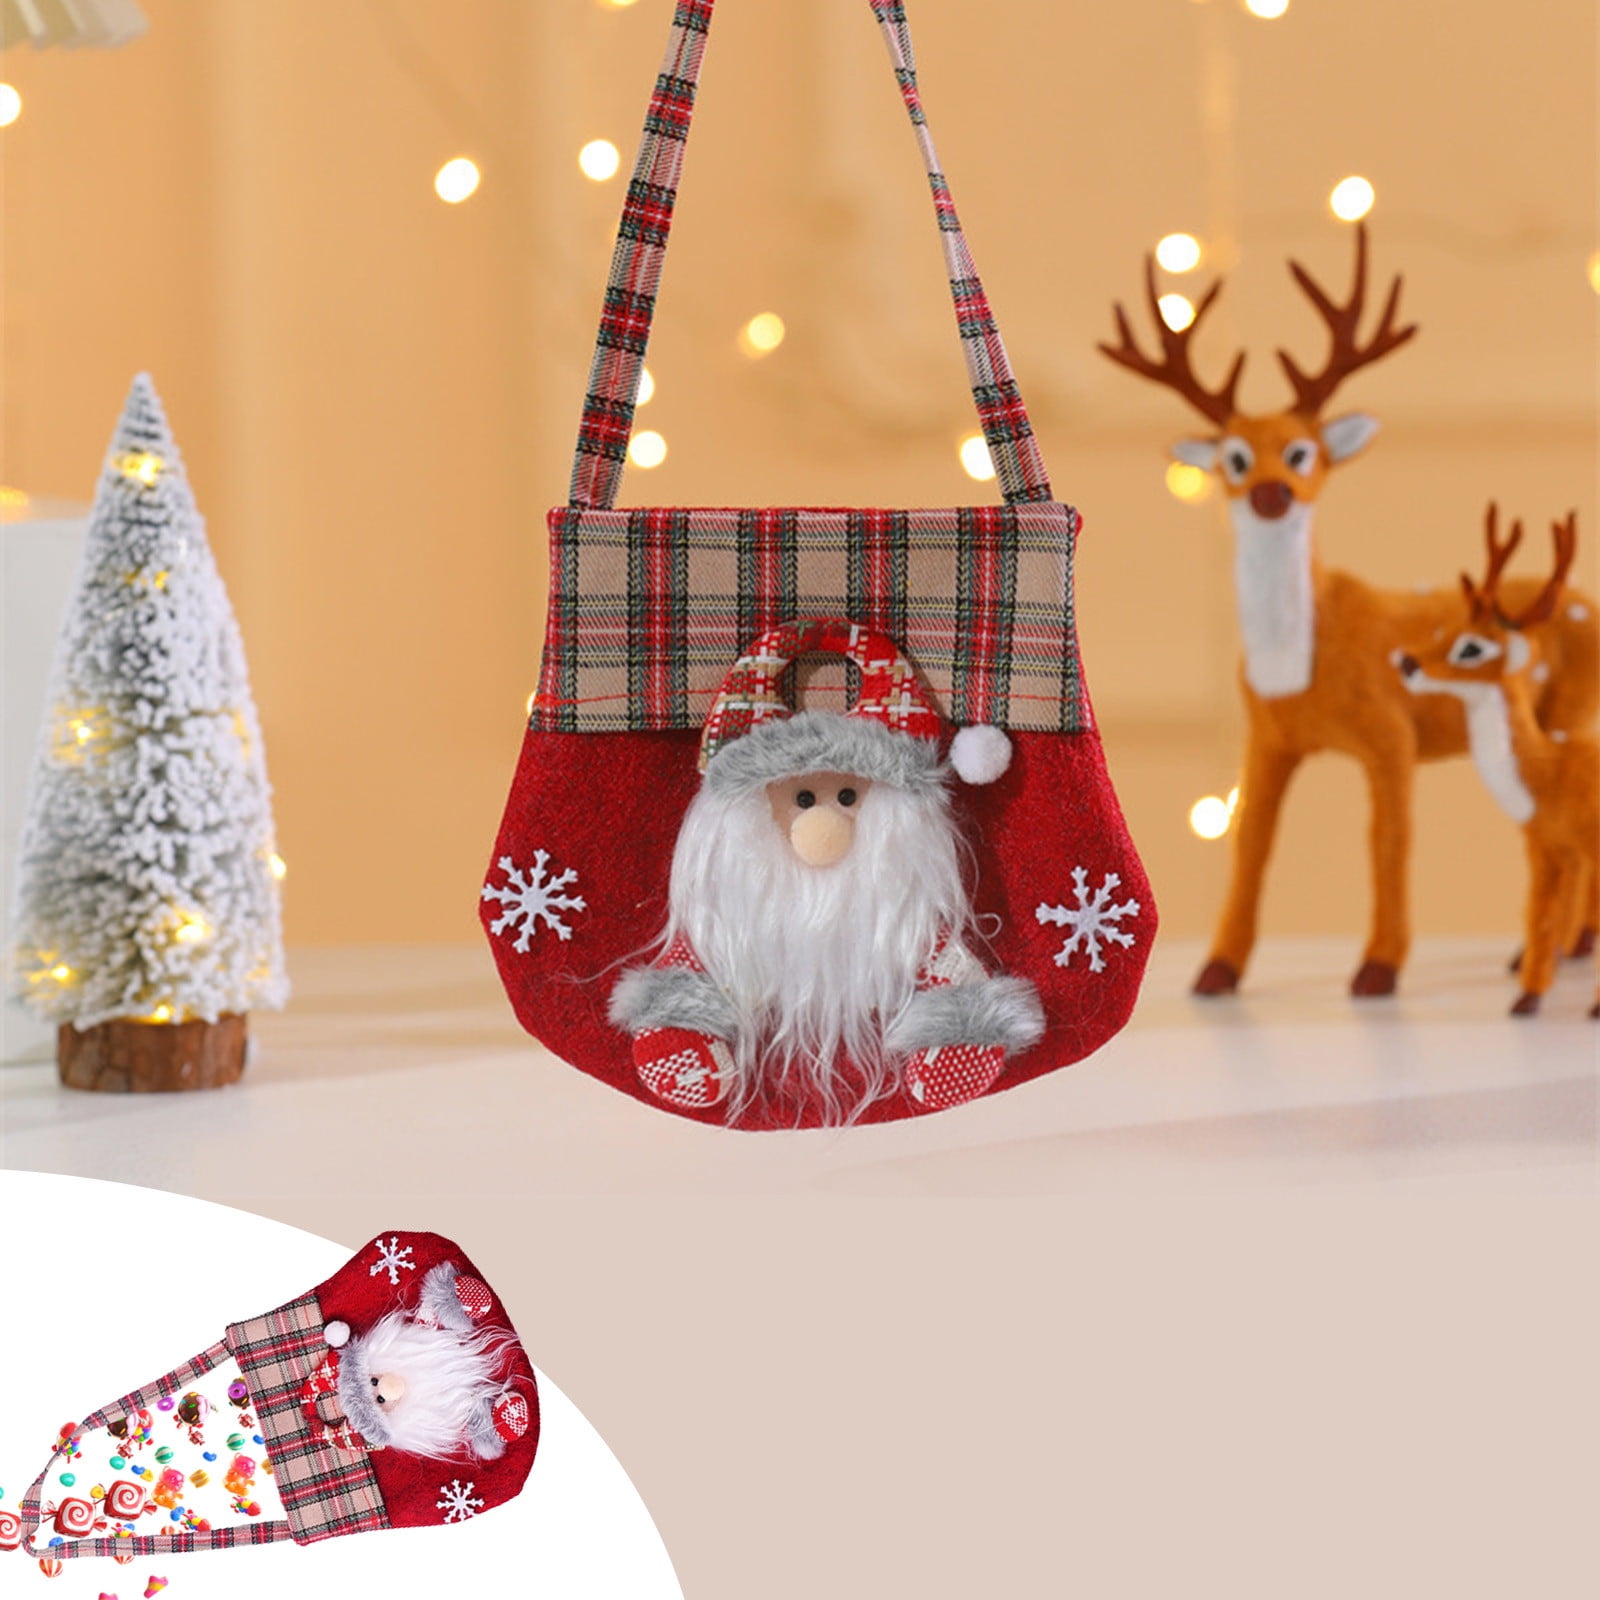 Rbckvxz Christmas Decorations Under Clearance, Christmas Decoration Festival Printing Gift Bag Pendant Candy Bag, Christmas Ornaments Room Decor